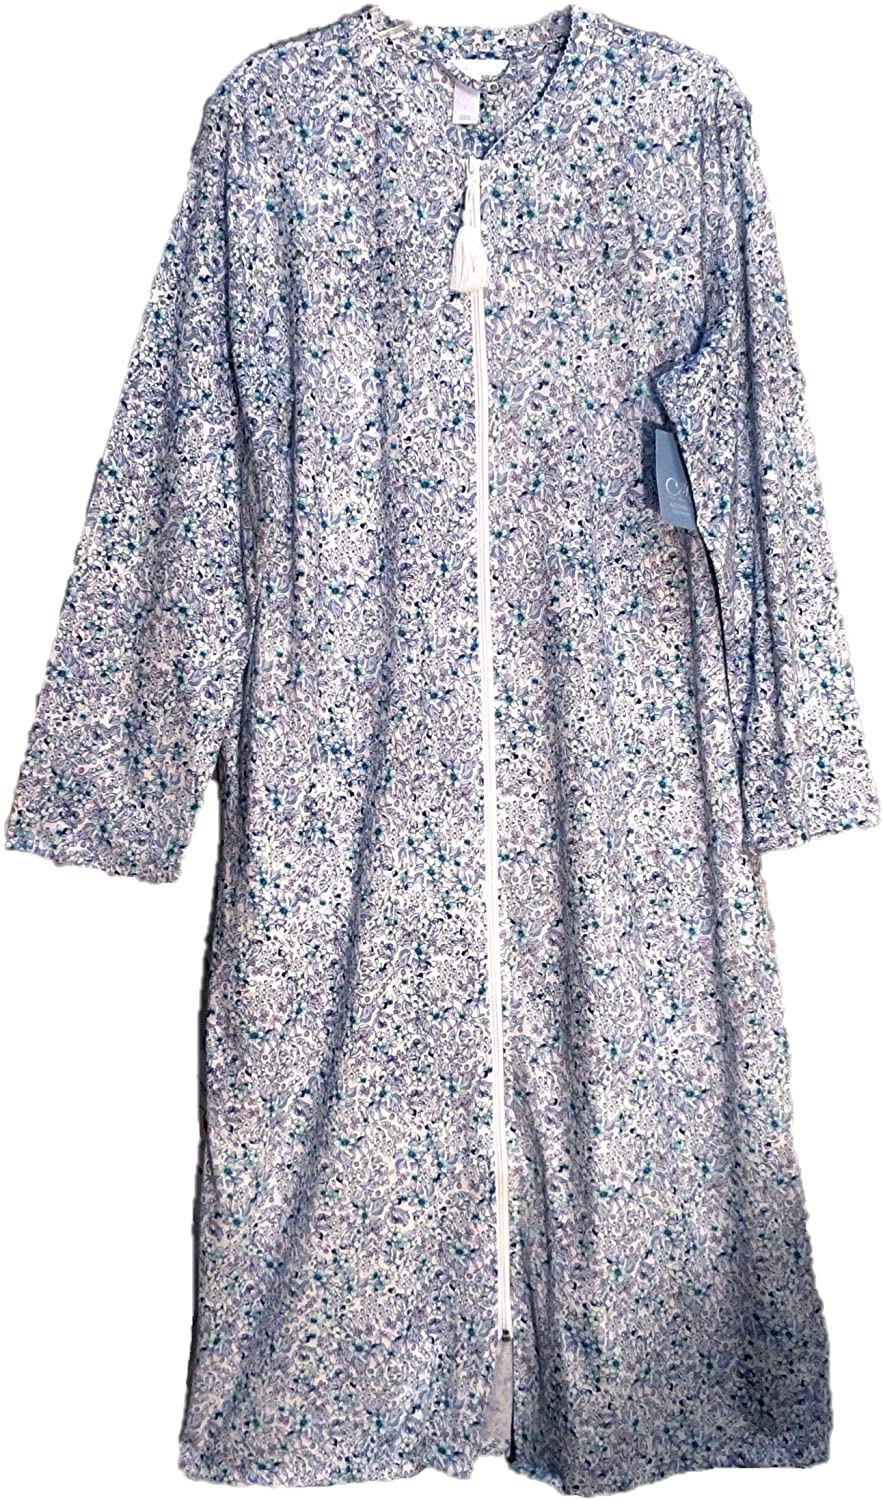 Price:$34.99 Adonna Long Cotton Blend Zip-Front Floral Nightgown Robe W/Pockets Womens Misses~M~L~New at Amazon Women’s Clothing store